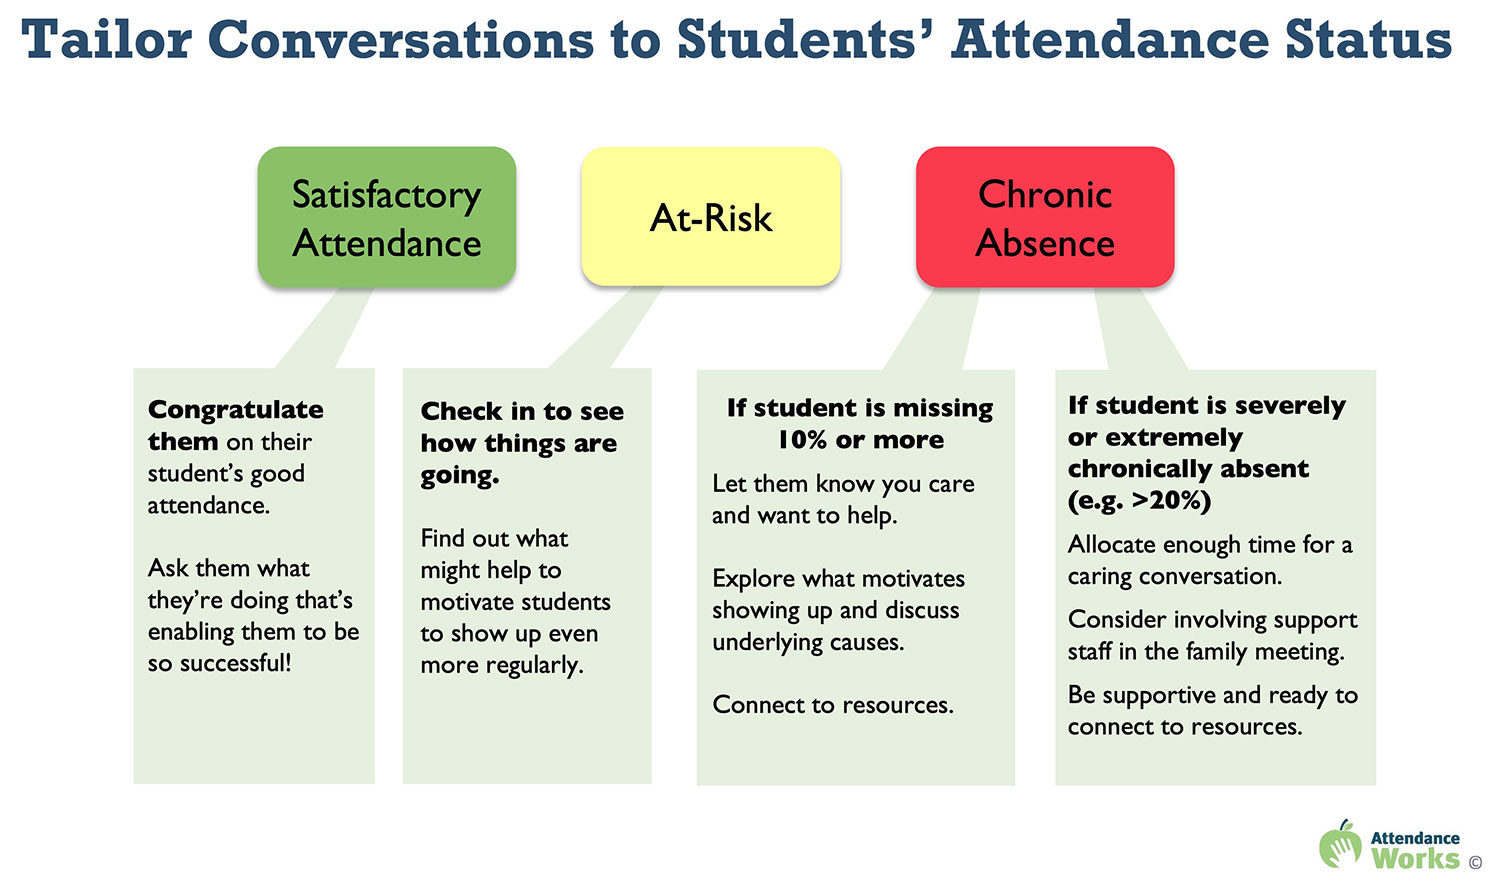 Tailor-Conversations-to-Students-Attendance-Status-Updated-3